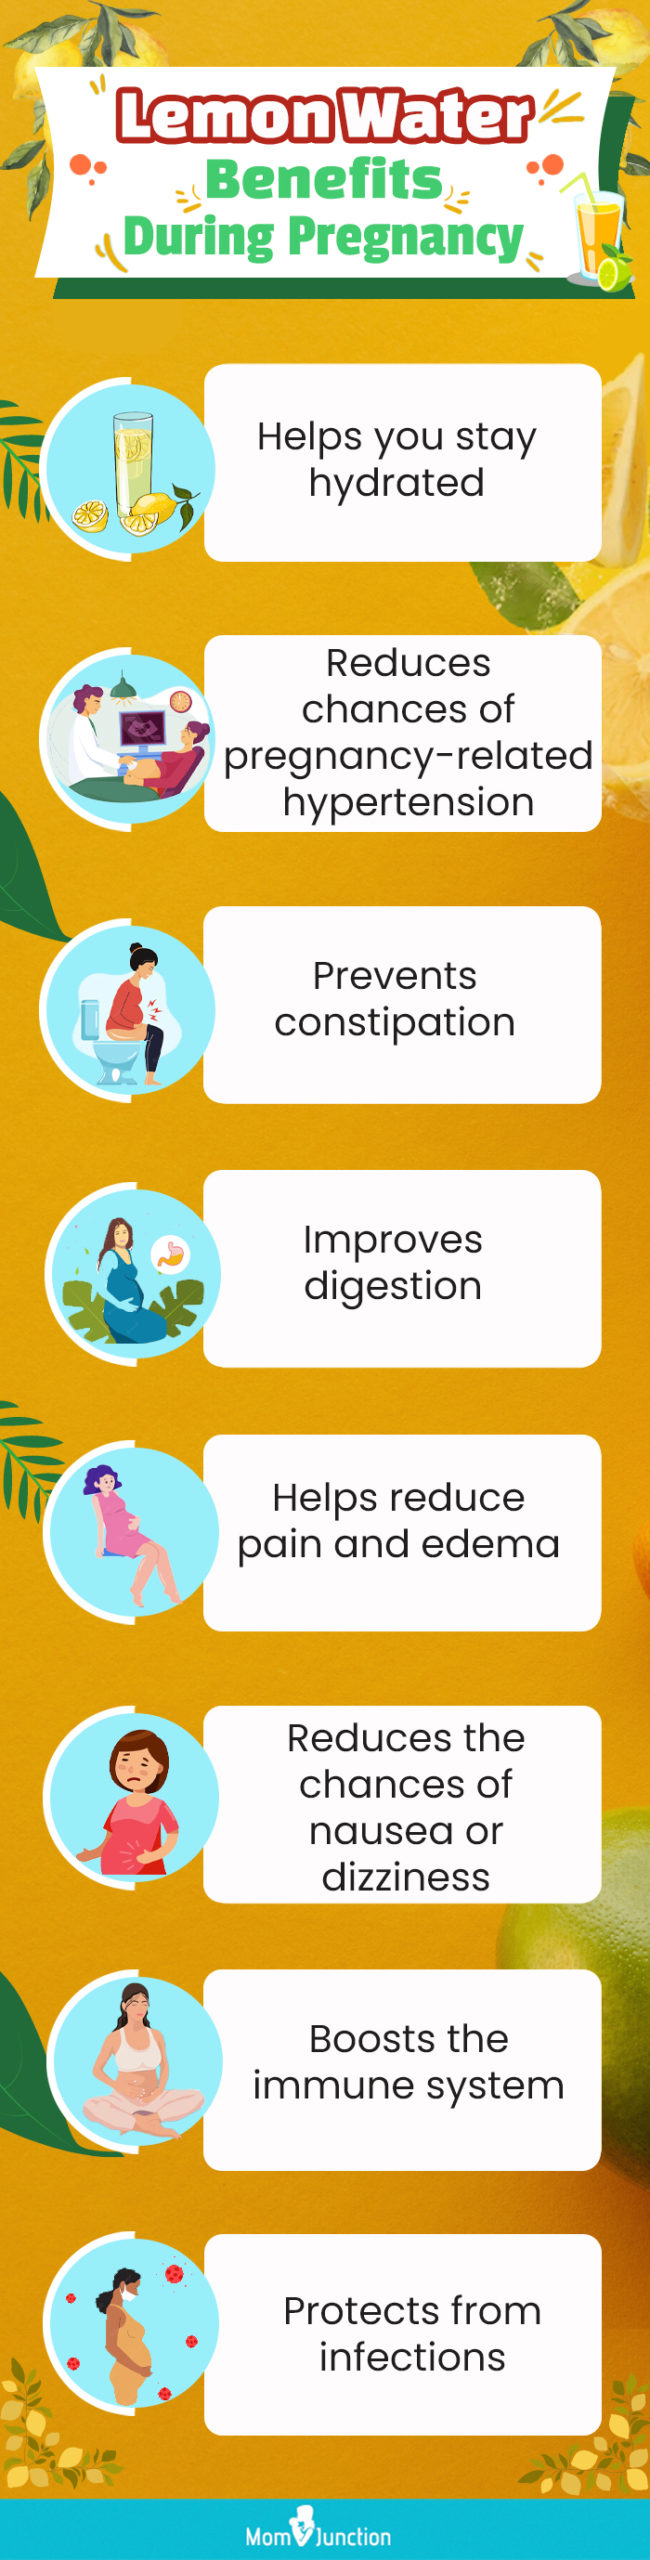 lemon water benefits during pregnancy (infographic)